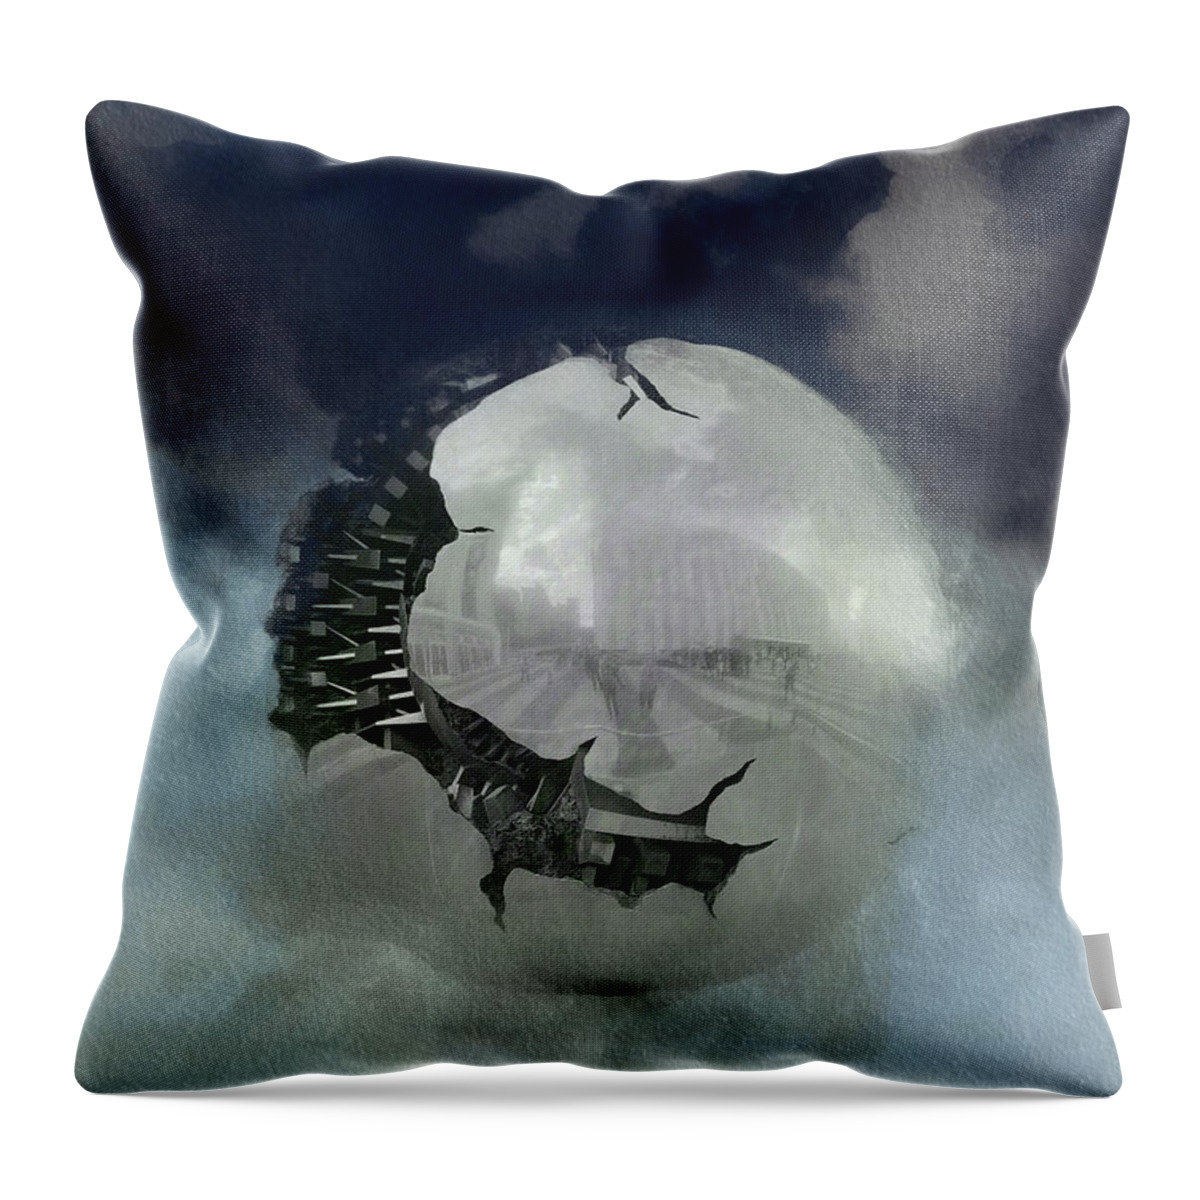 2020 Throw Pillow featuring the photograph 2020 by Carol Whaley Addassi